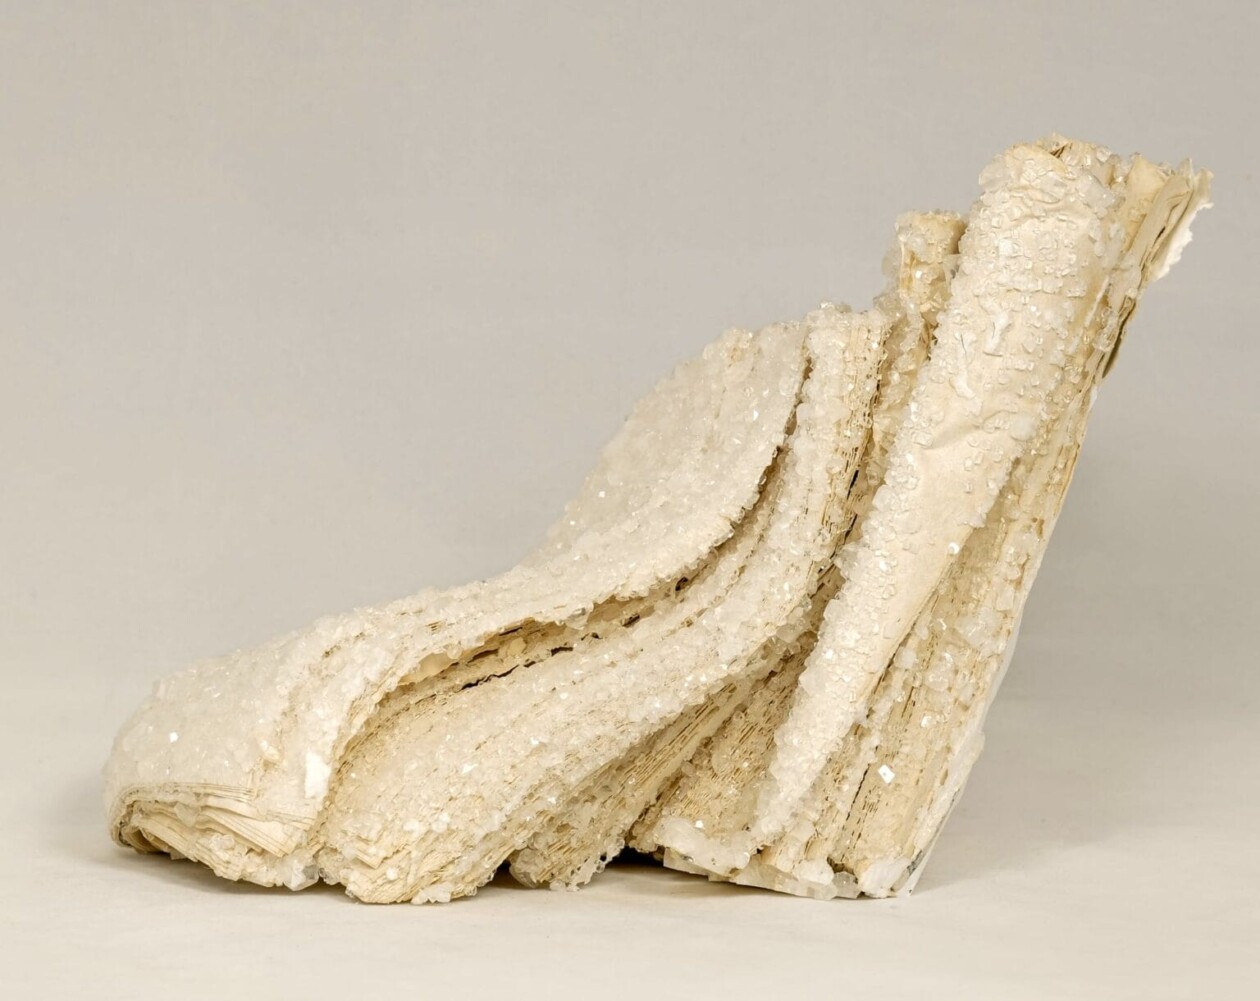 Crystallized Books, A Sculptures Series By Alexis Arnold (23)